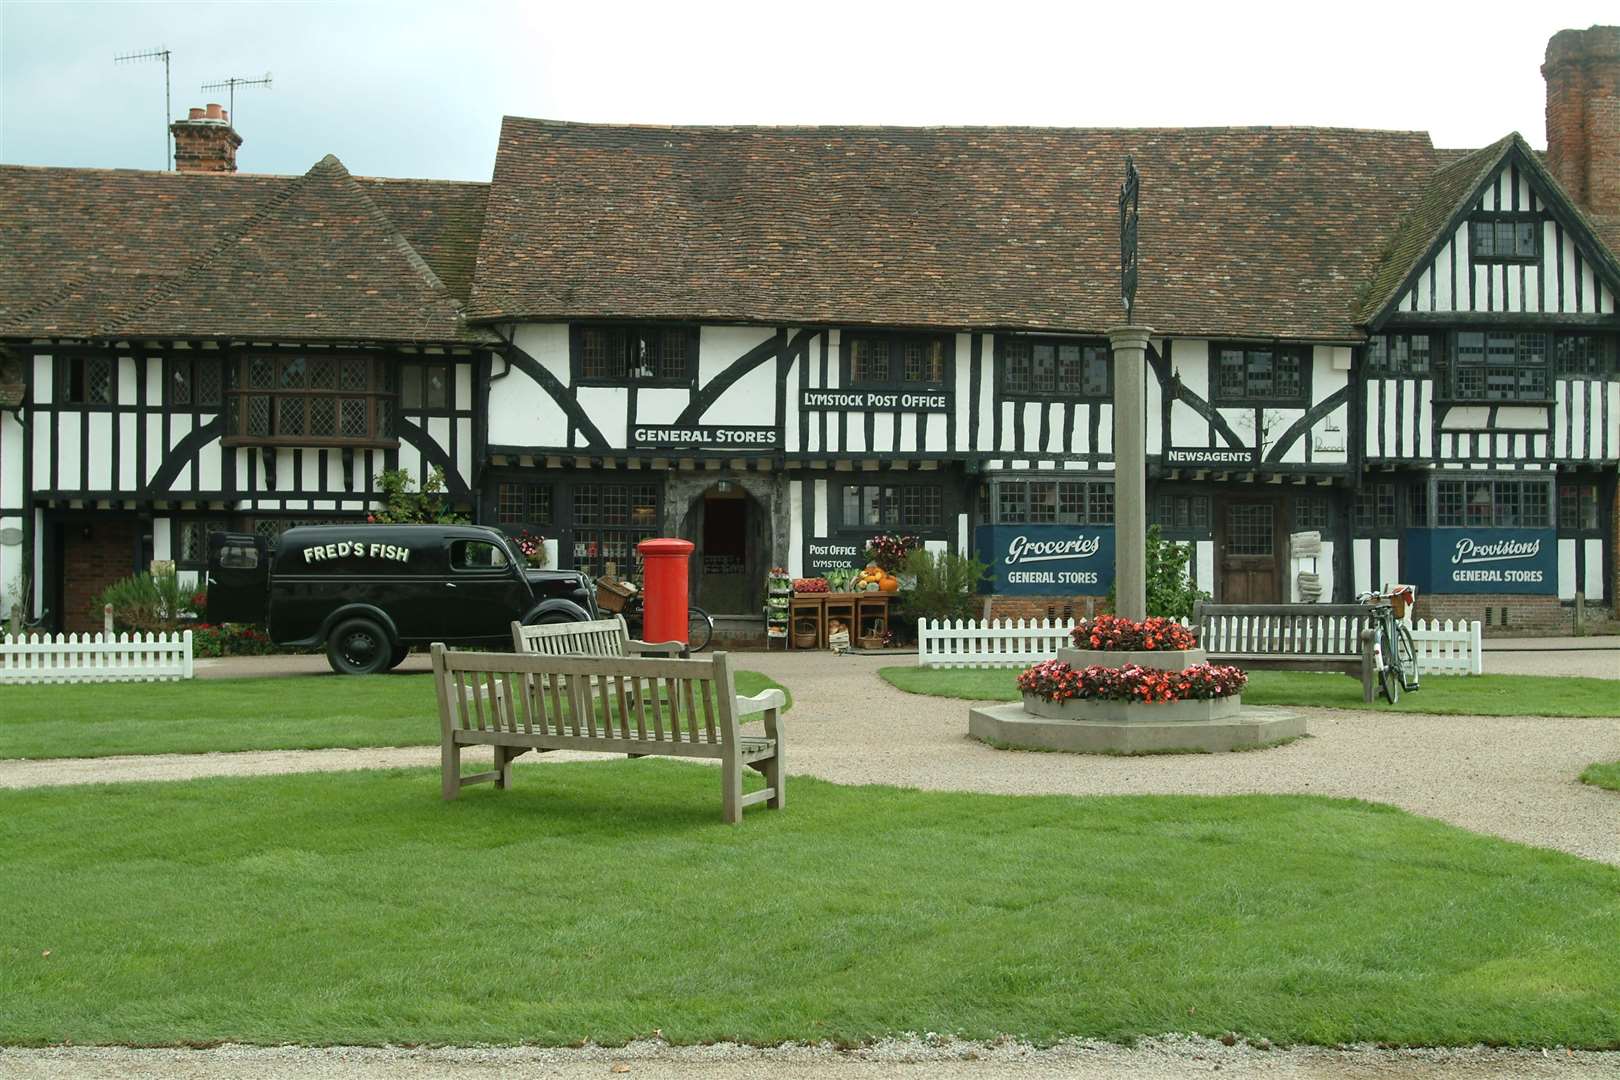 Take away the parked cars, add in some grass and a memorial, and the village square becomes even more picturesque. Here it is pictured for the Miss Marple shoot in 2005